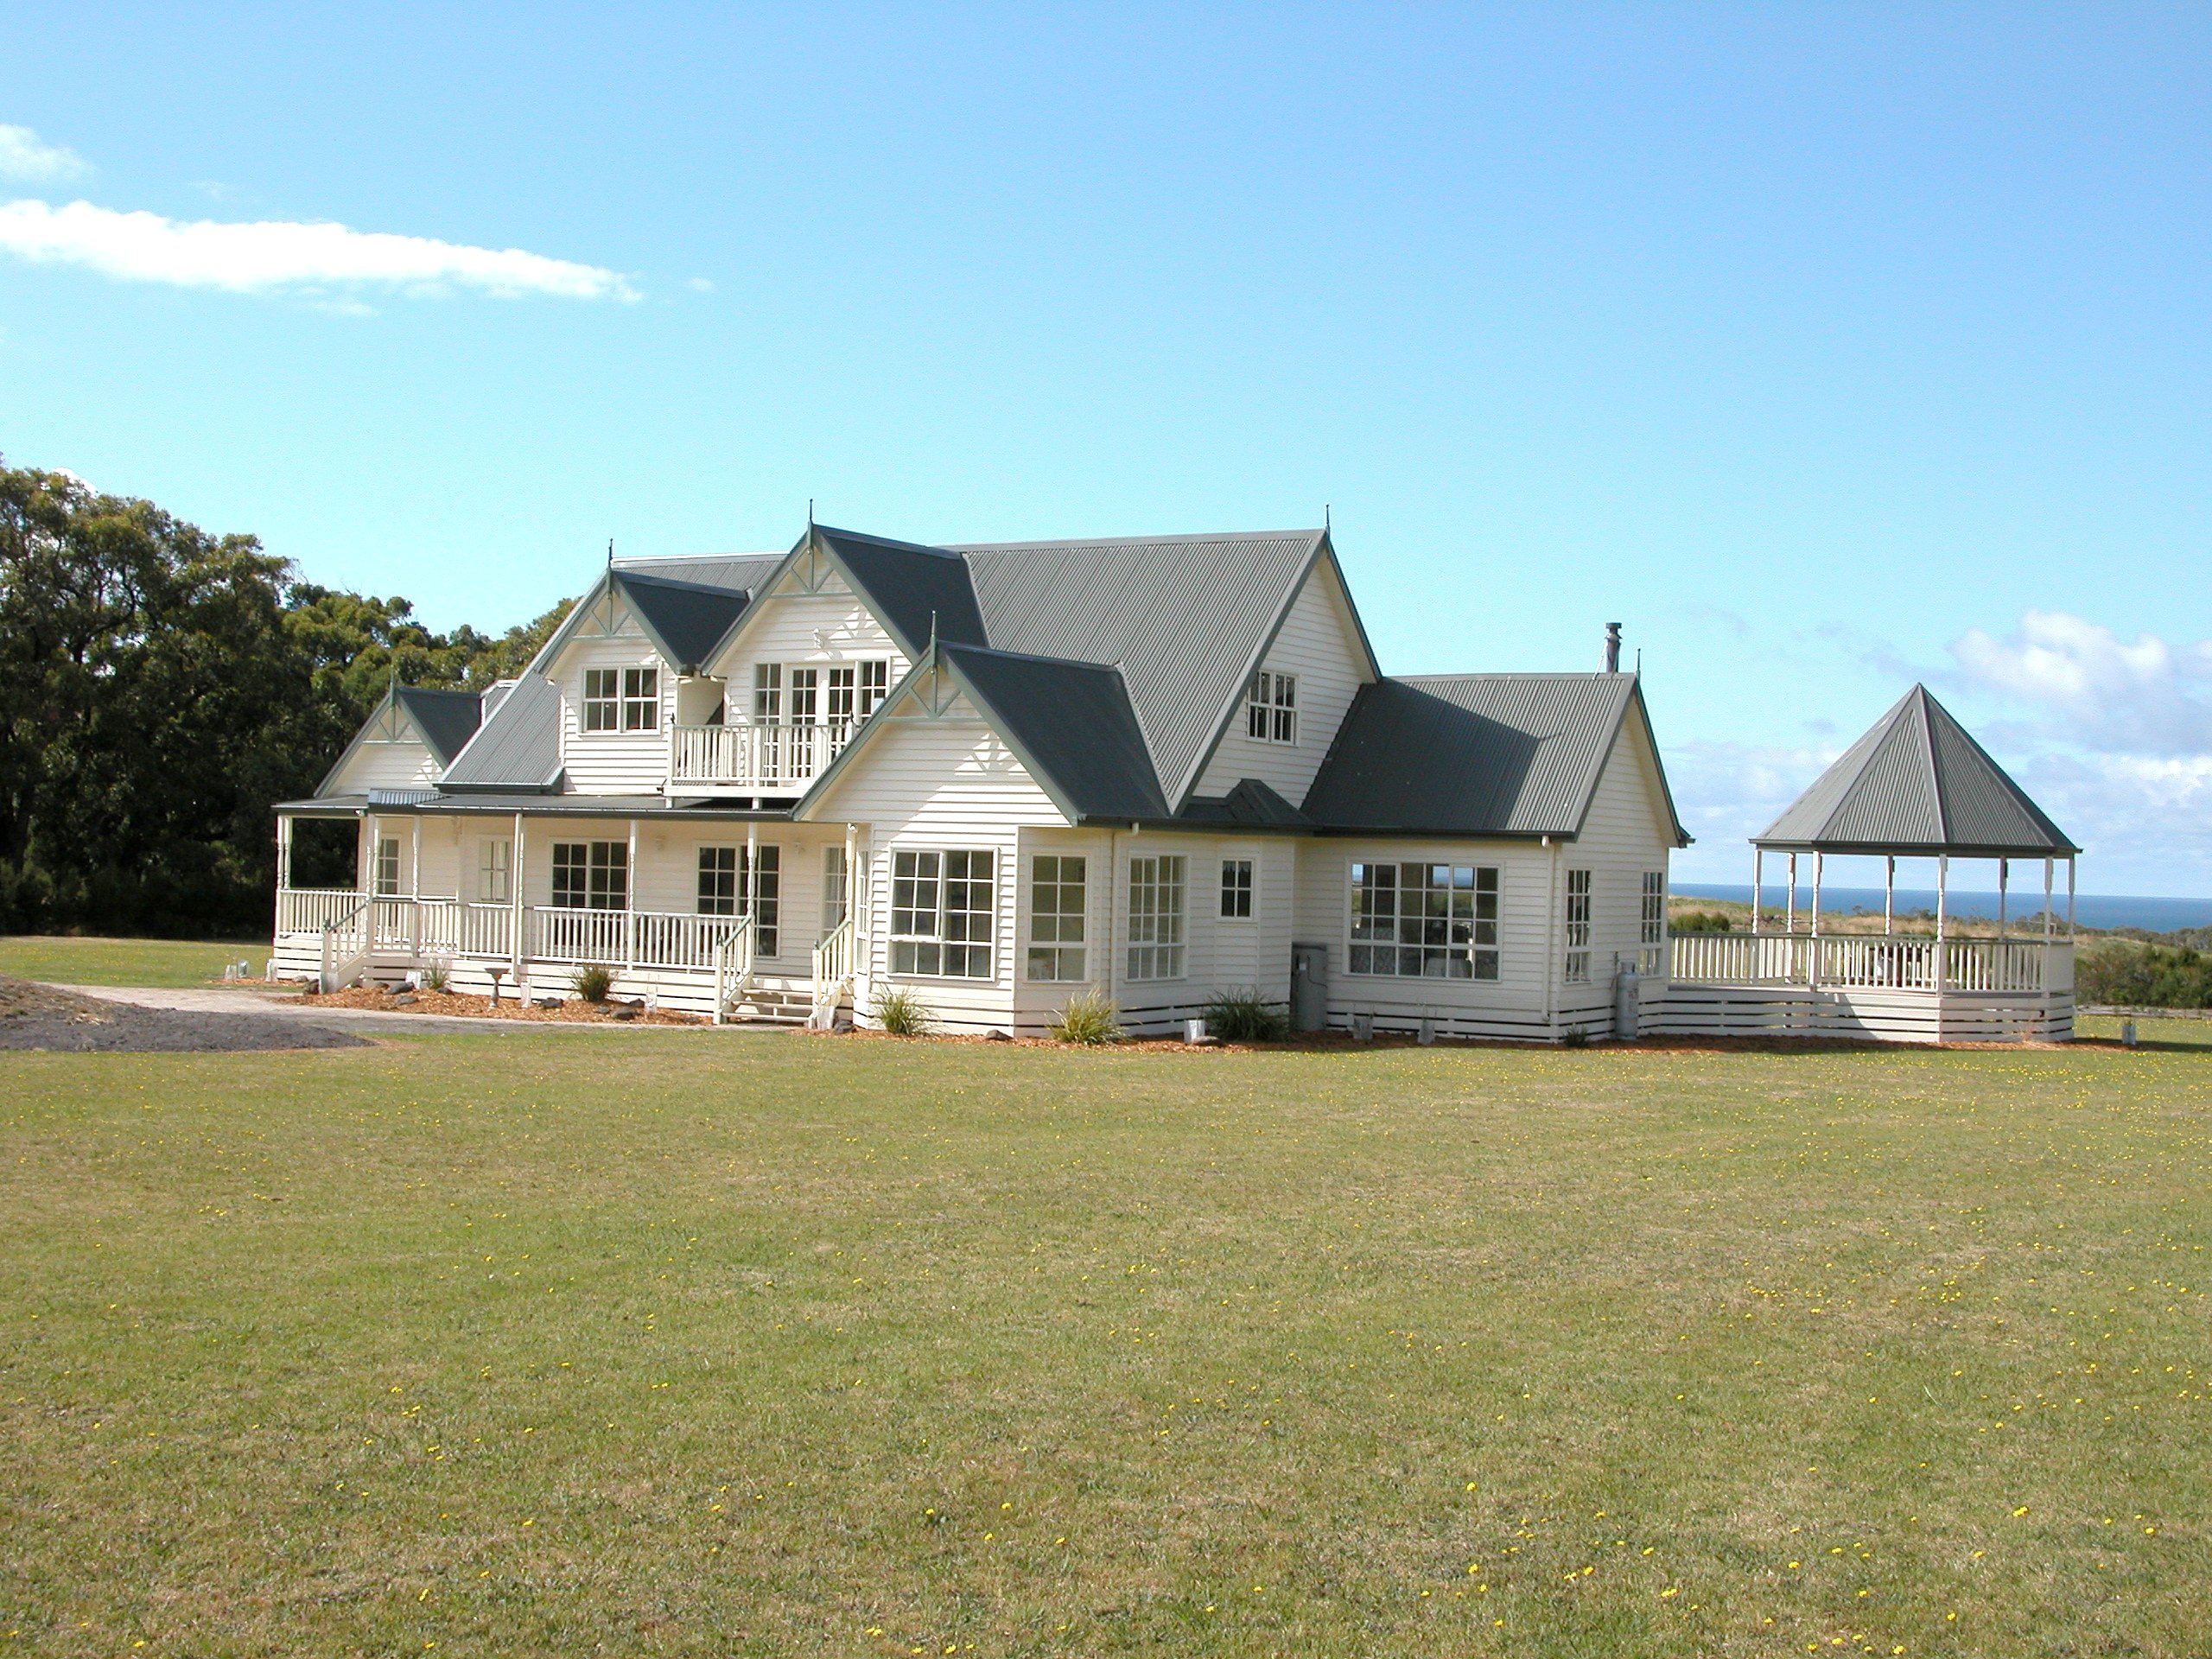 Inverloch - The best of country and beach living built by Farm Houses of Australia